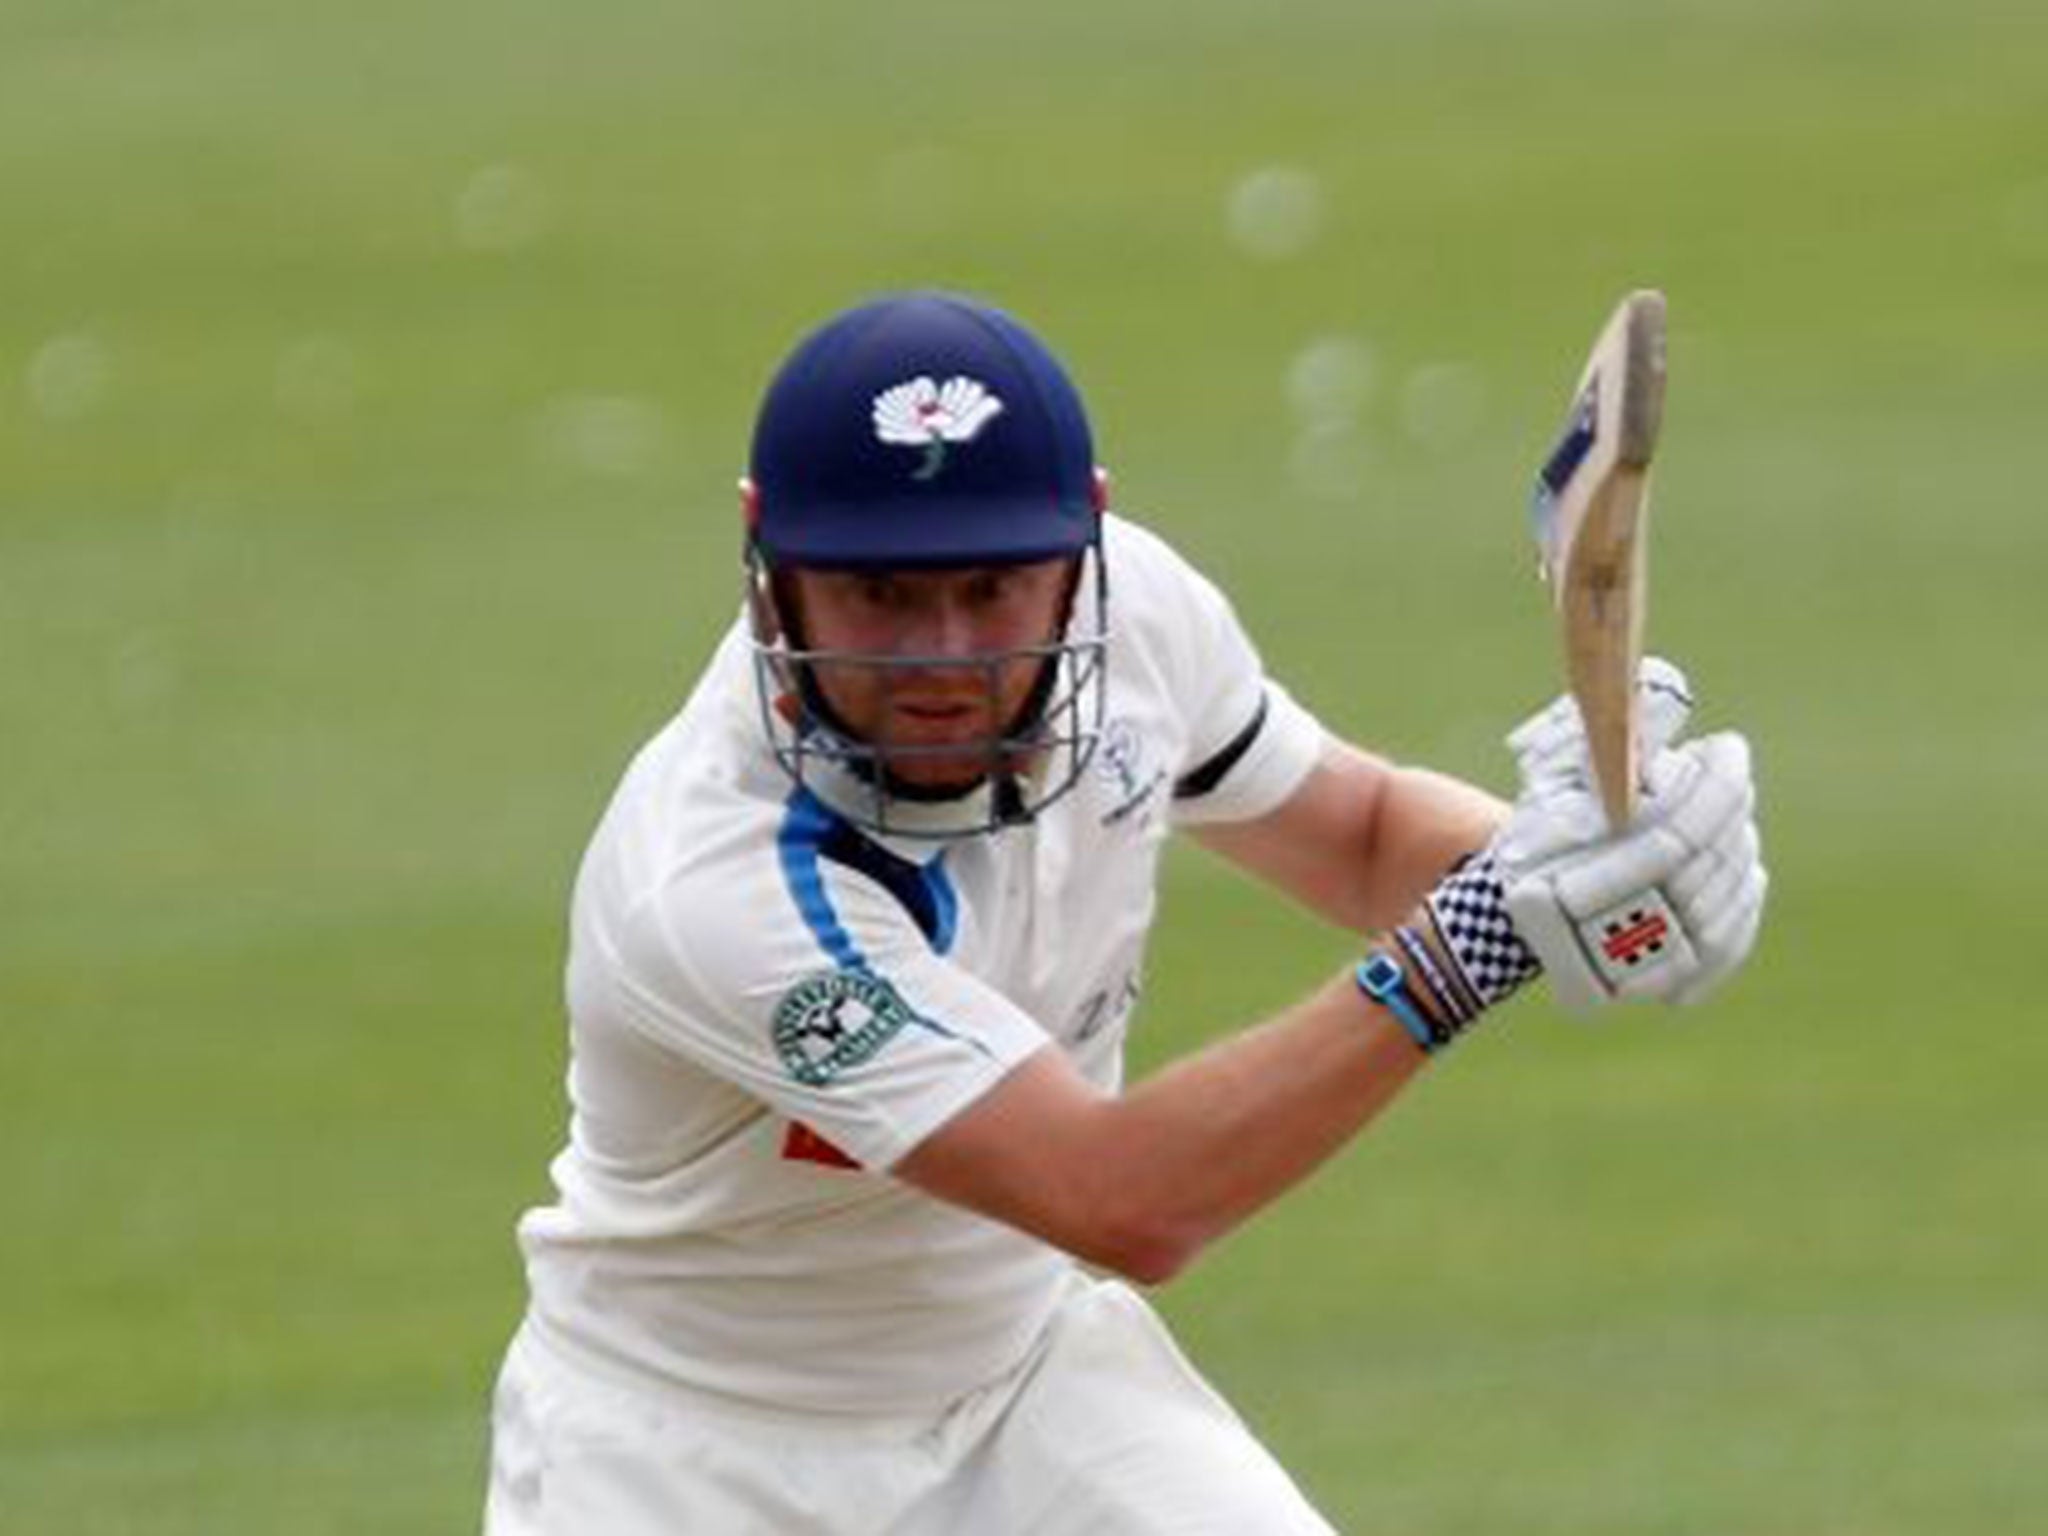 Kane Williamson of Yorkshire in action during day three of the LV County Championship division One match between Yorkshire and Middlesex on July 21, 2014 in Scarborough